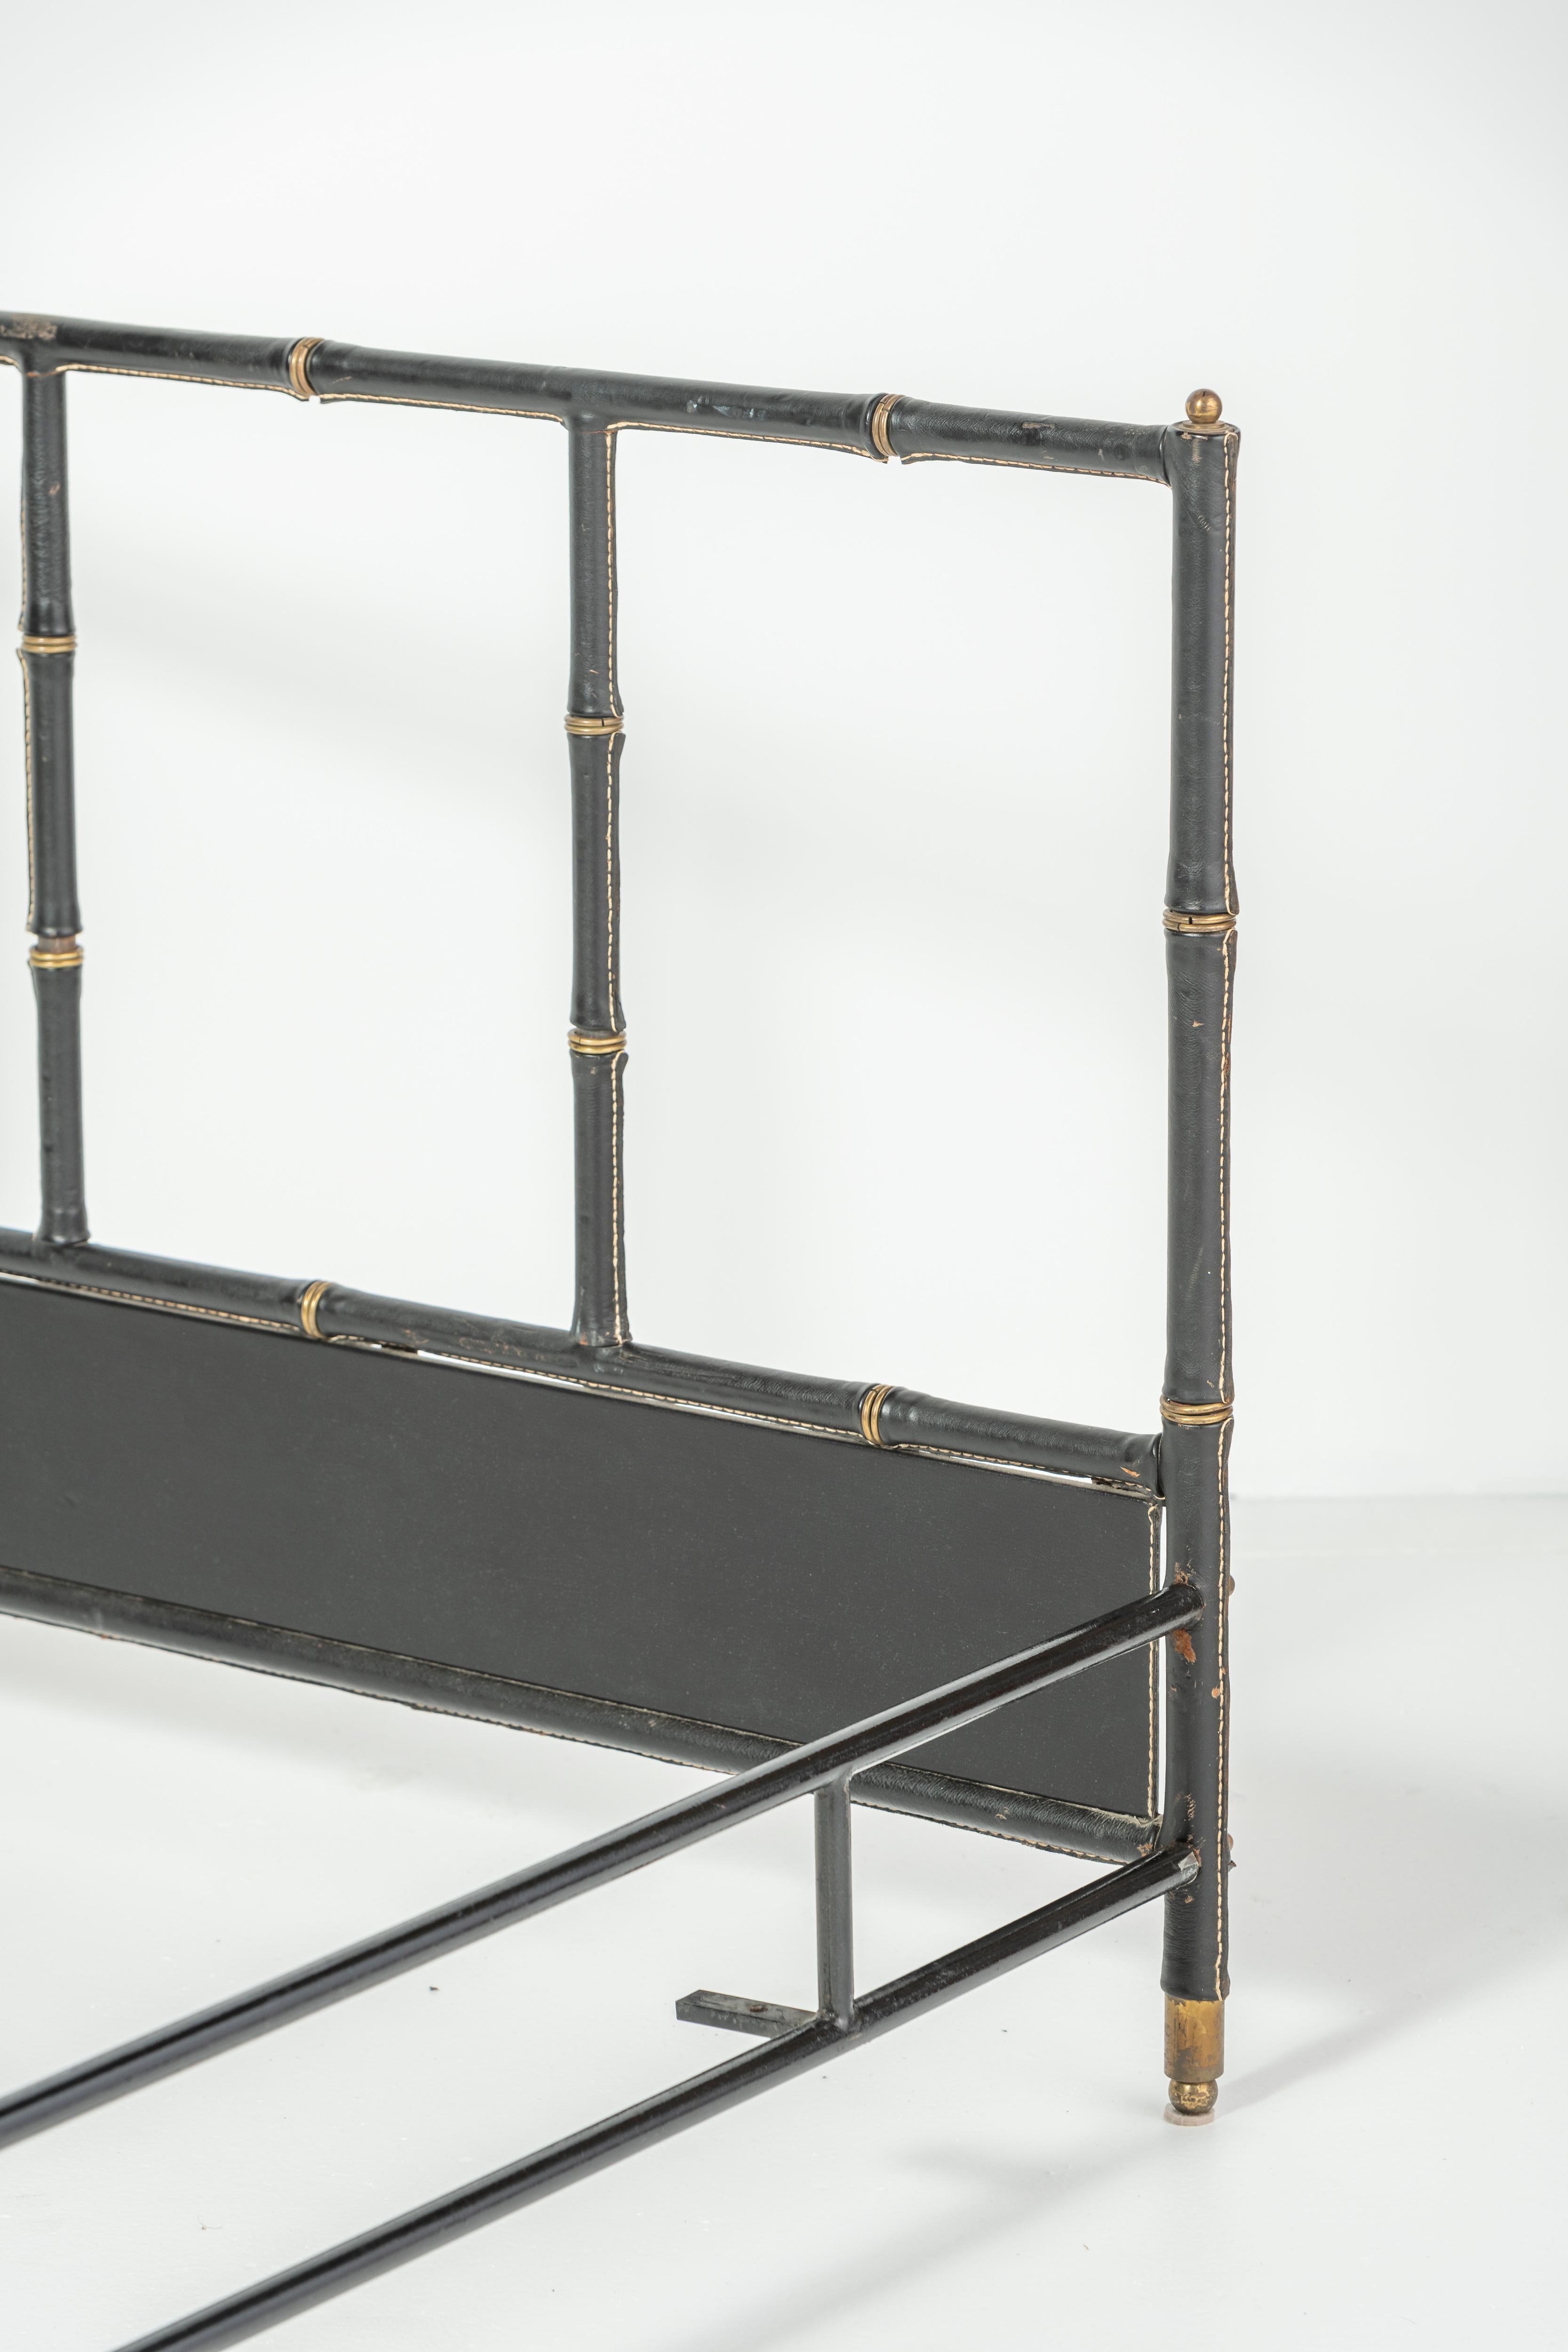 Elegant bed frame by French designer Jacques Adnet. Completely wrapped in black saddle leather. Characteristic stacked bamboo motif. Signature Jacques Adnet contrast-stitching. Holds a full size mattress. 